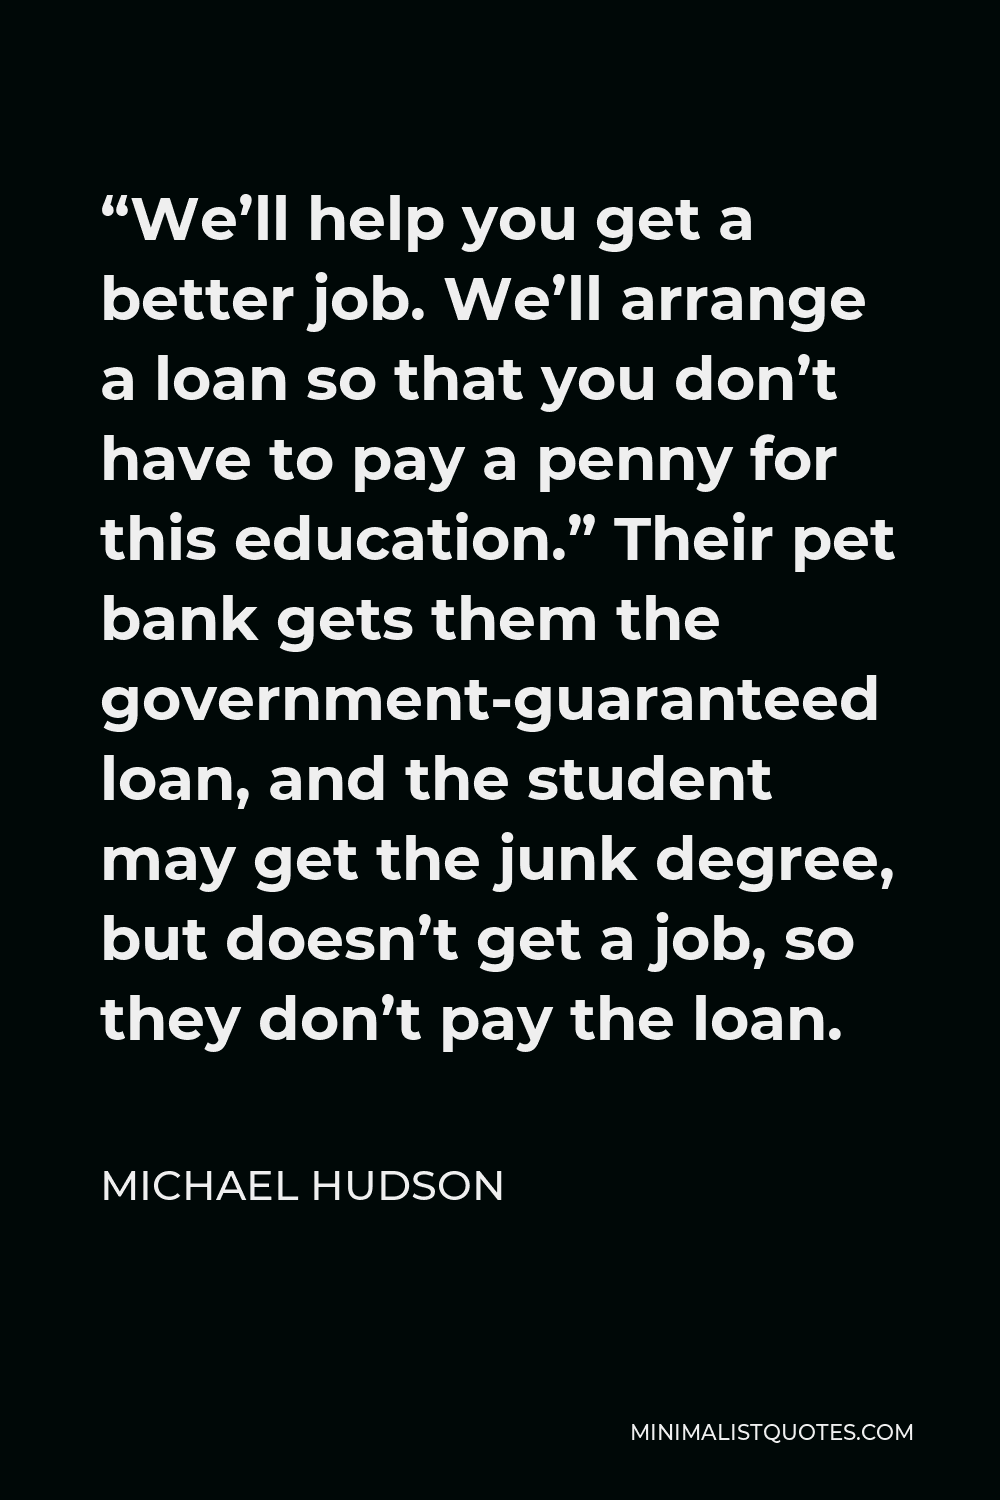 Michael Hudson Quote - “We’ll help you get a better job. We’ll arrange a loan so that you don’t have to pay a penny for this education.” Their pet bank gets them the government-guaranteed loan, and the student may get the junk degree, but doesn’t get a job, so they don’t pay the loan.